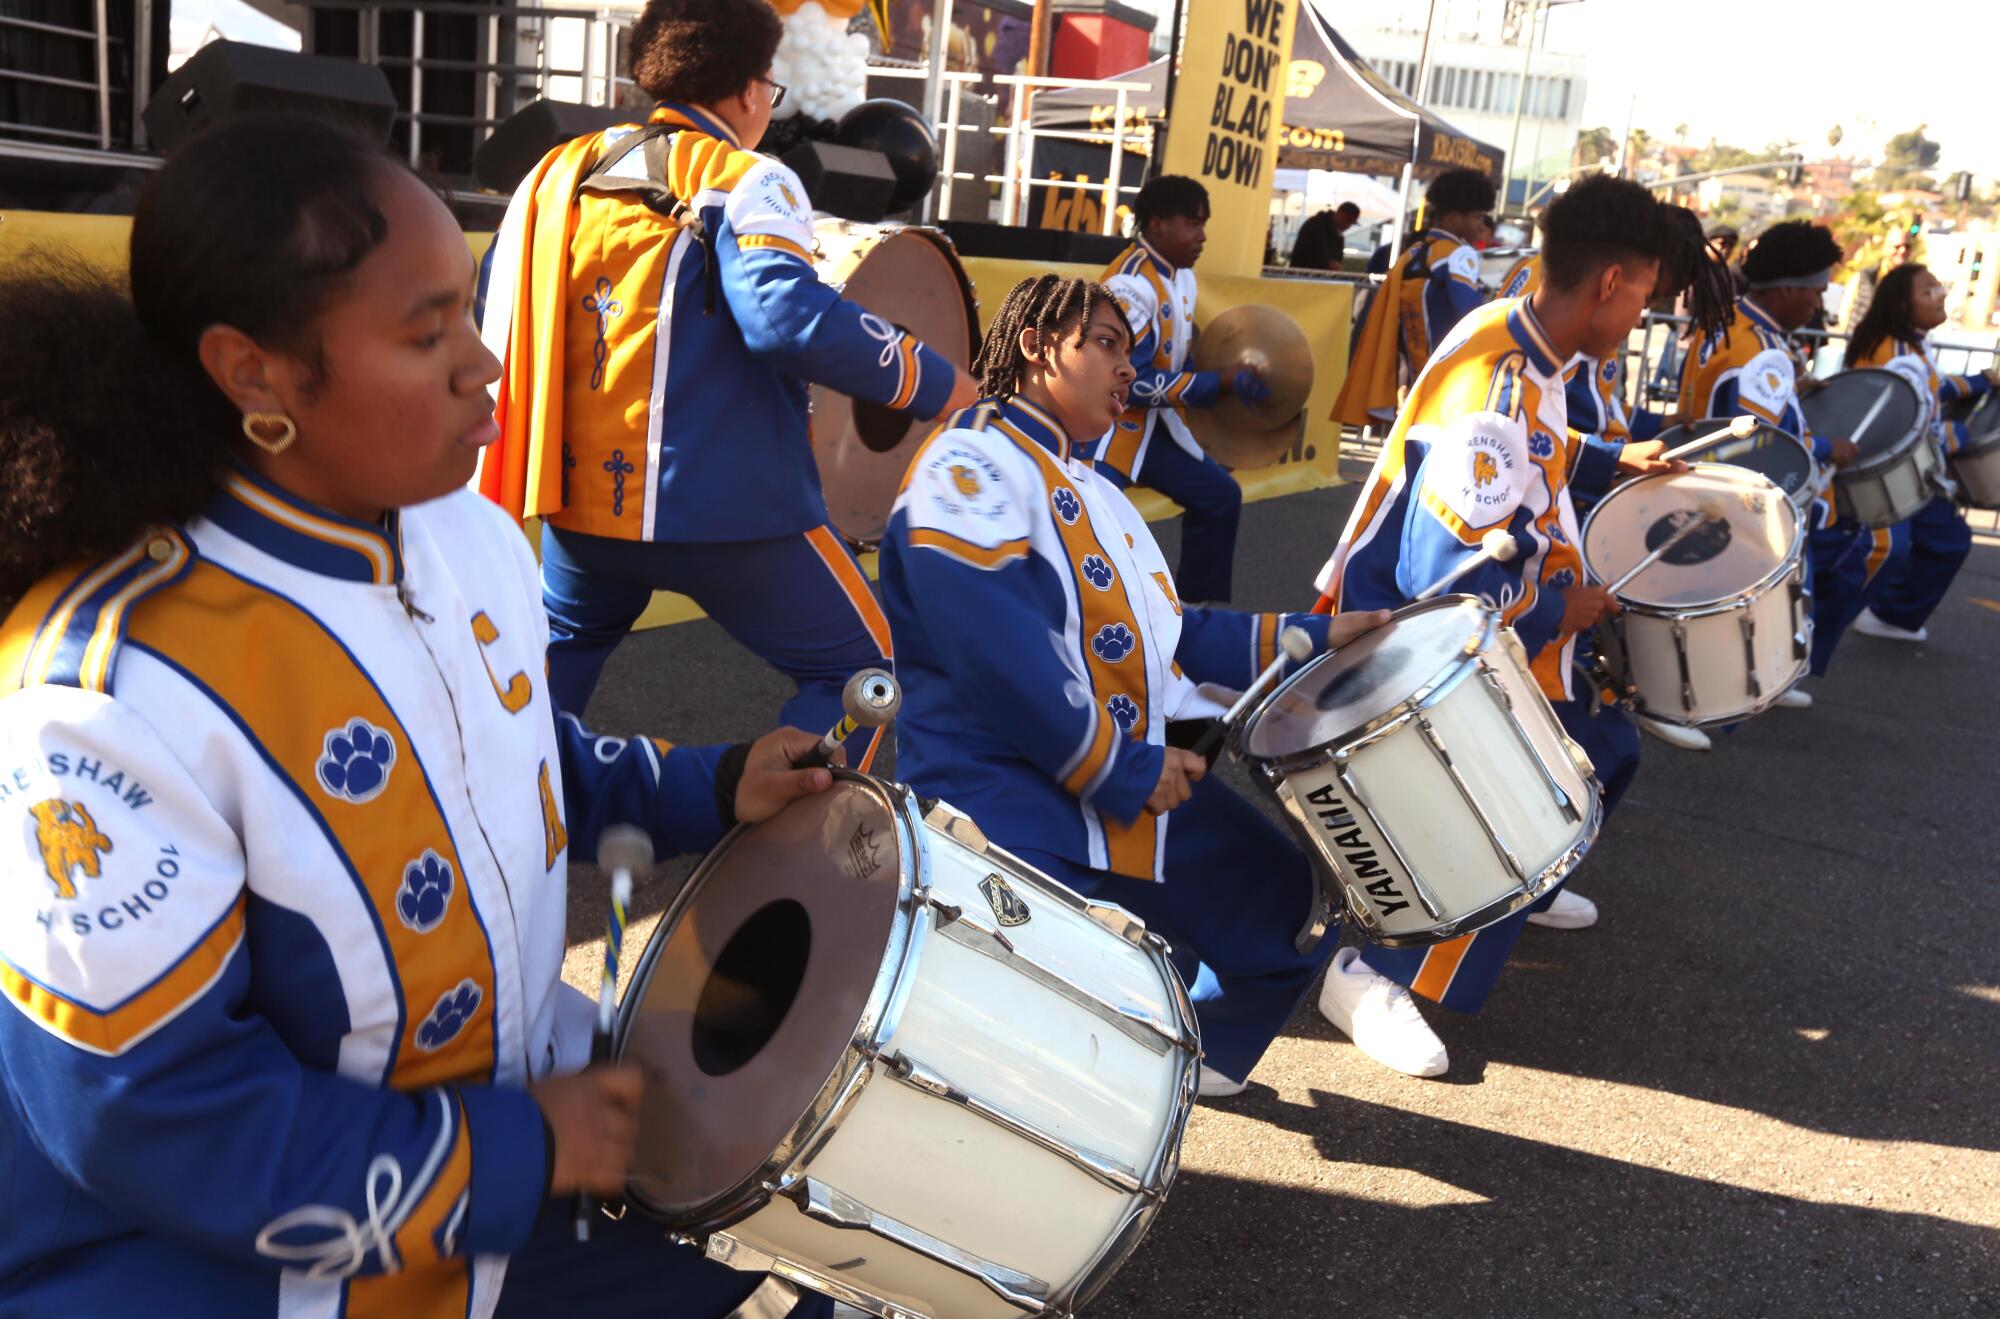 Members of the Crenshaw High School Marching Band perform at the KBLA 1580 Talk Radio "homecoming" event 